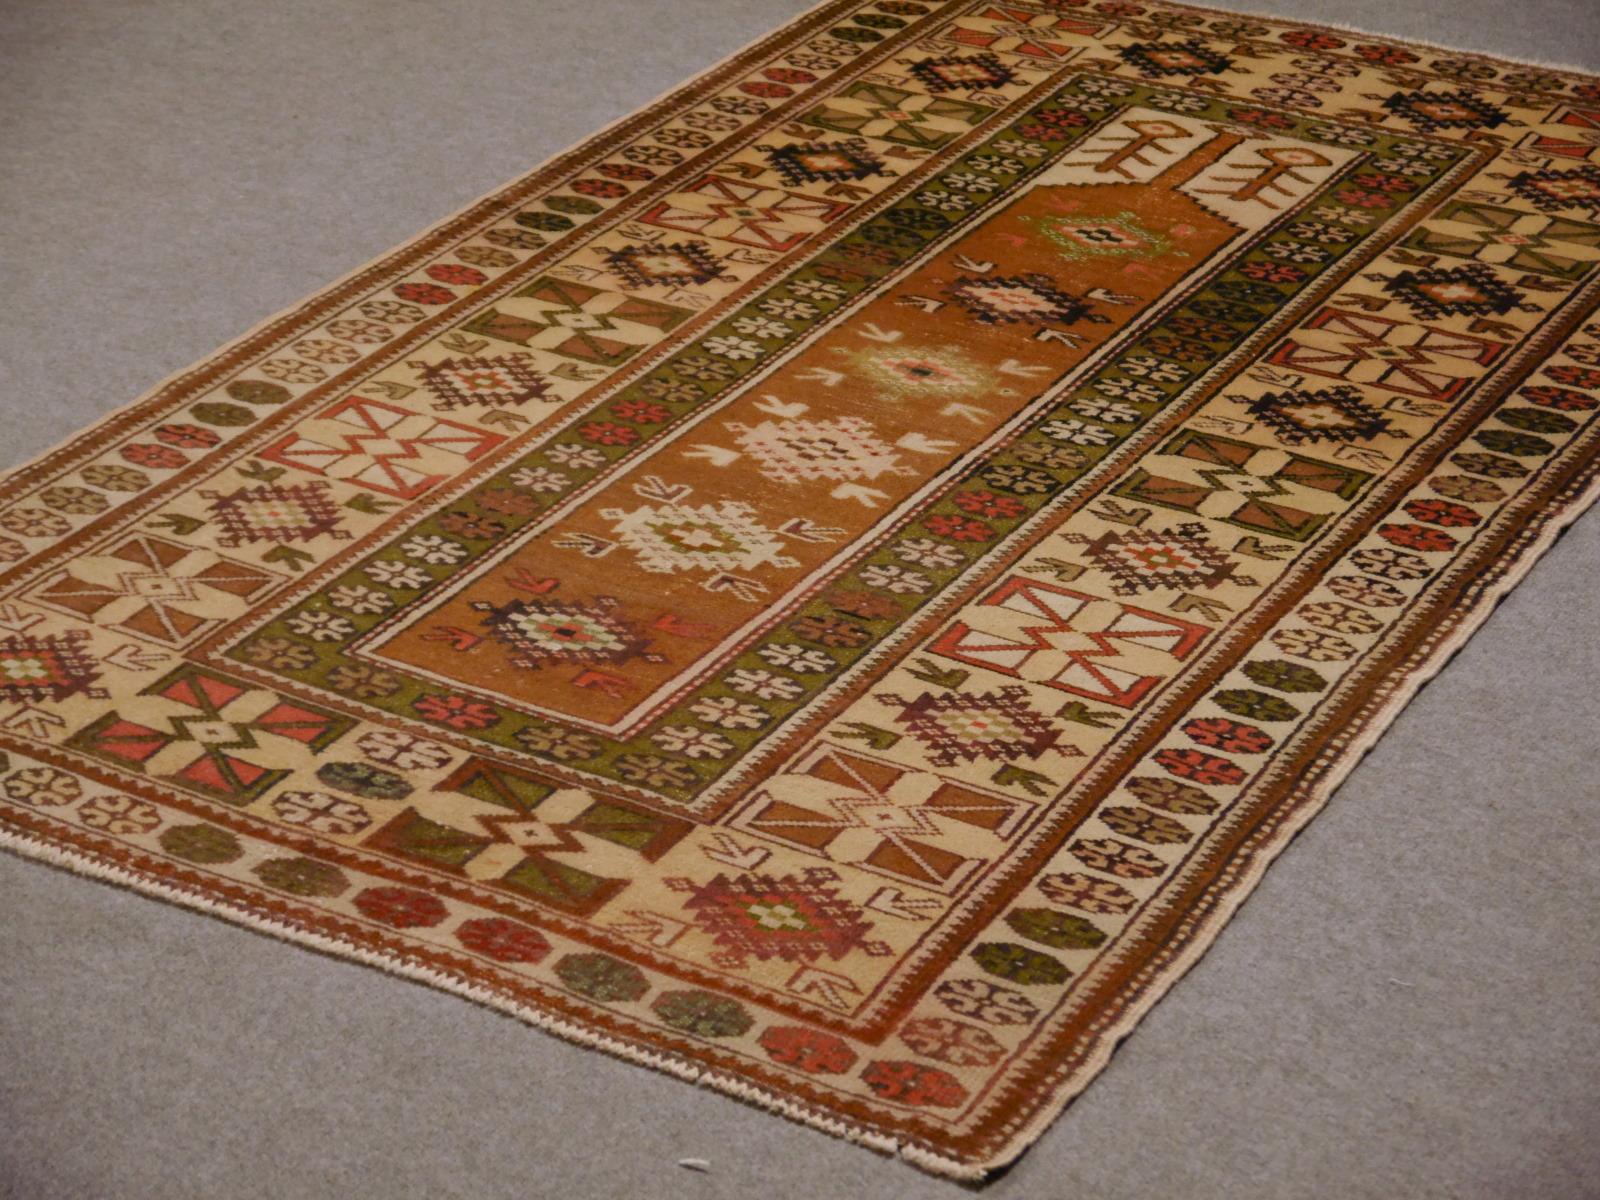 Tribal Turkish Melas rug from western Anatolia. Hand-knotted with fine wool showing a traditional prayer rug design. Very good condition.